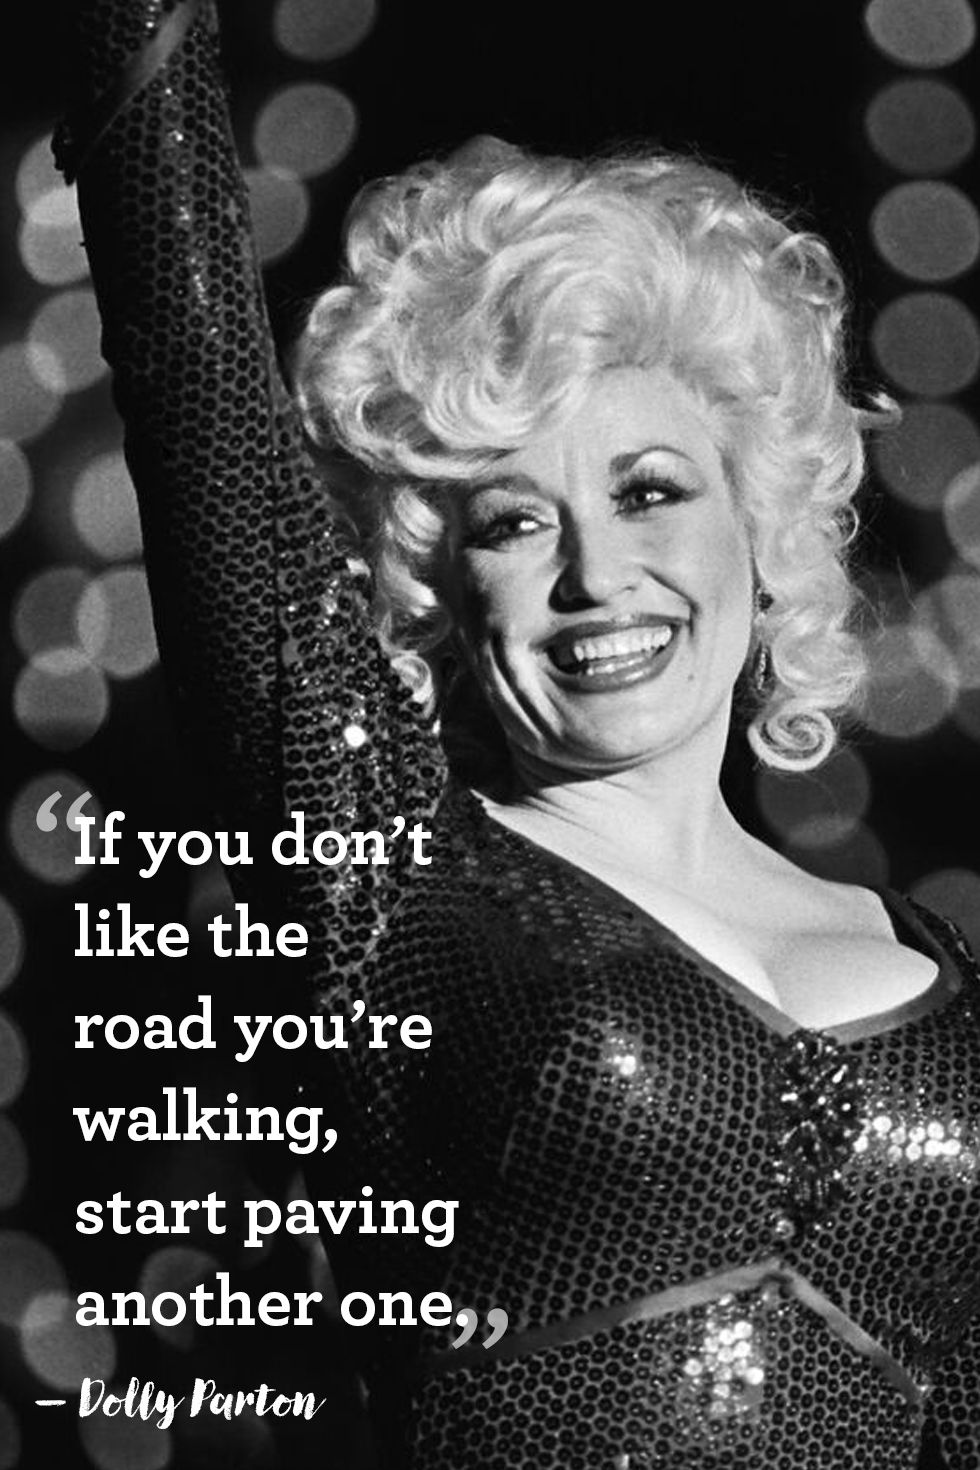 Dolly Parton Quotes About Life